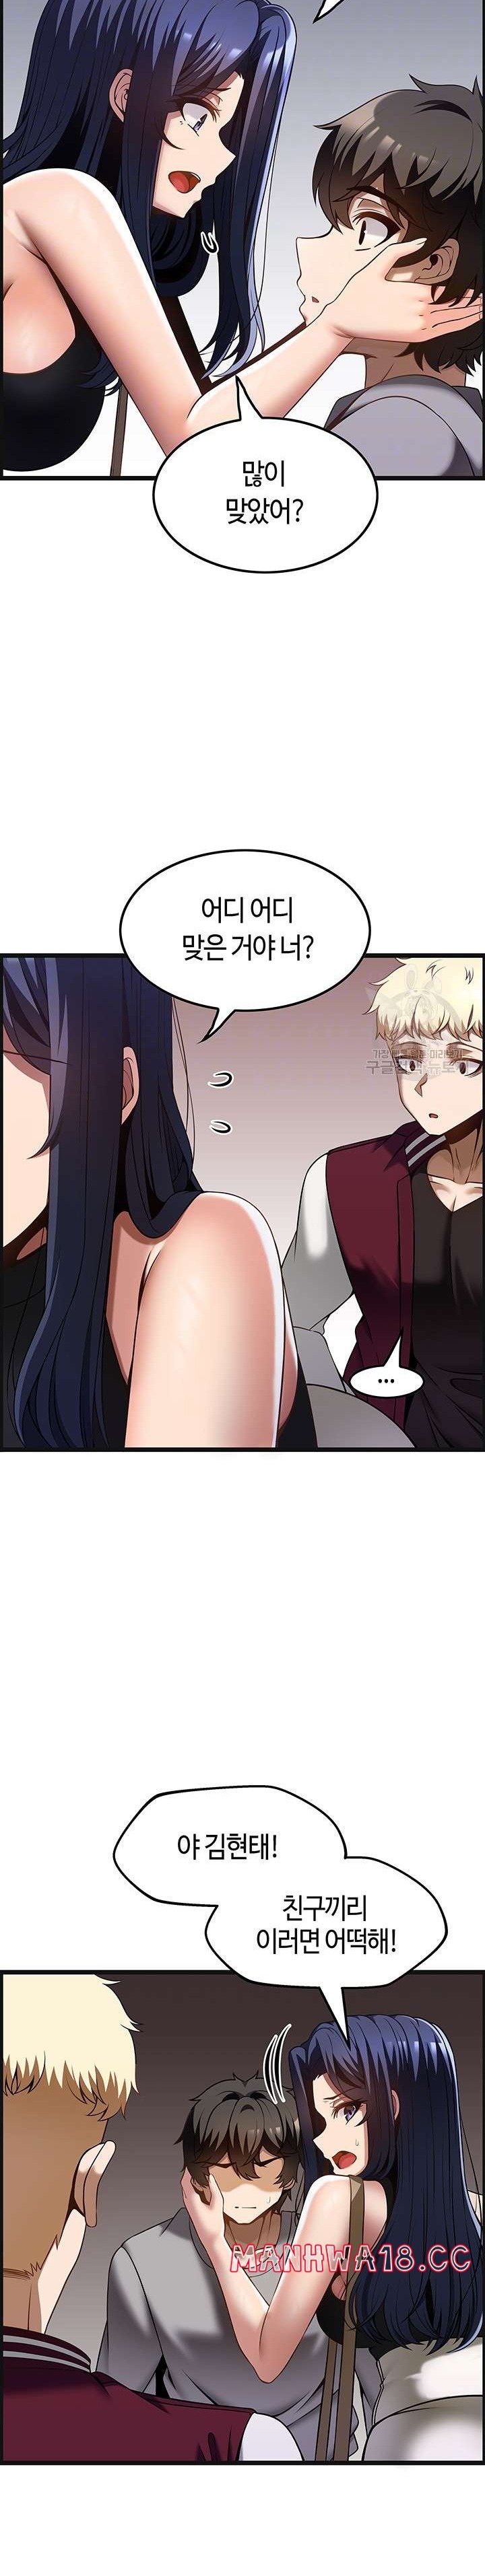 too-good-at-massages-raw-chap-39-8